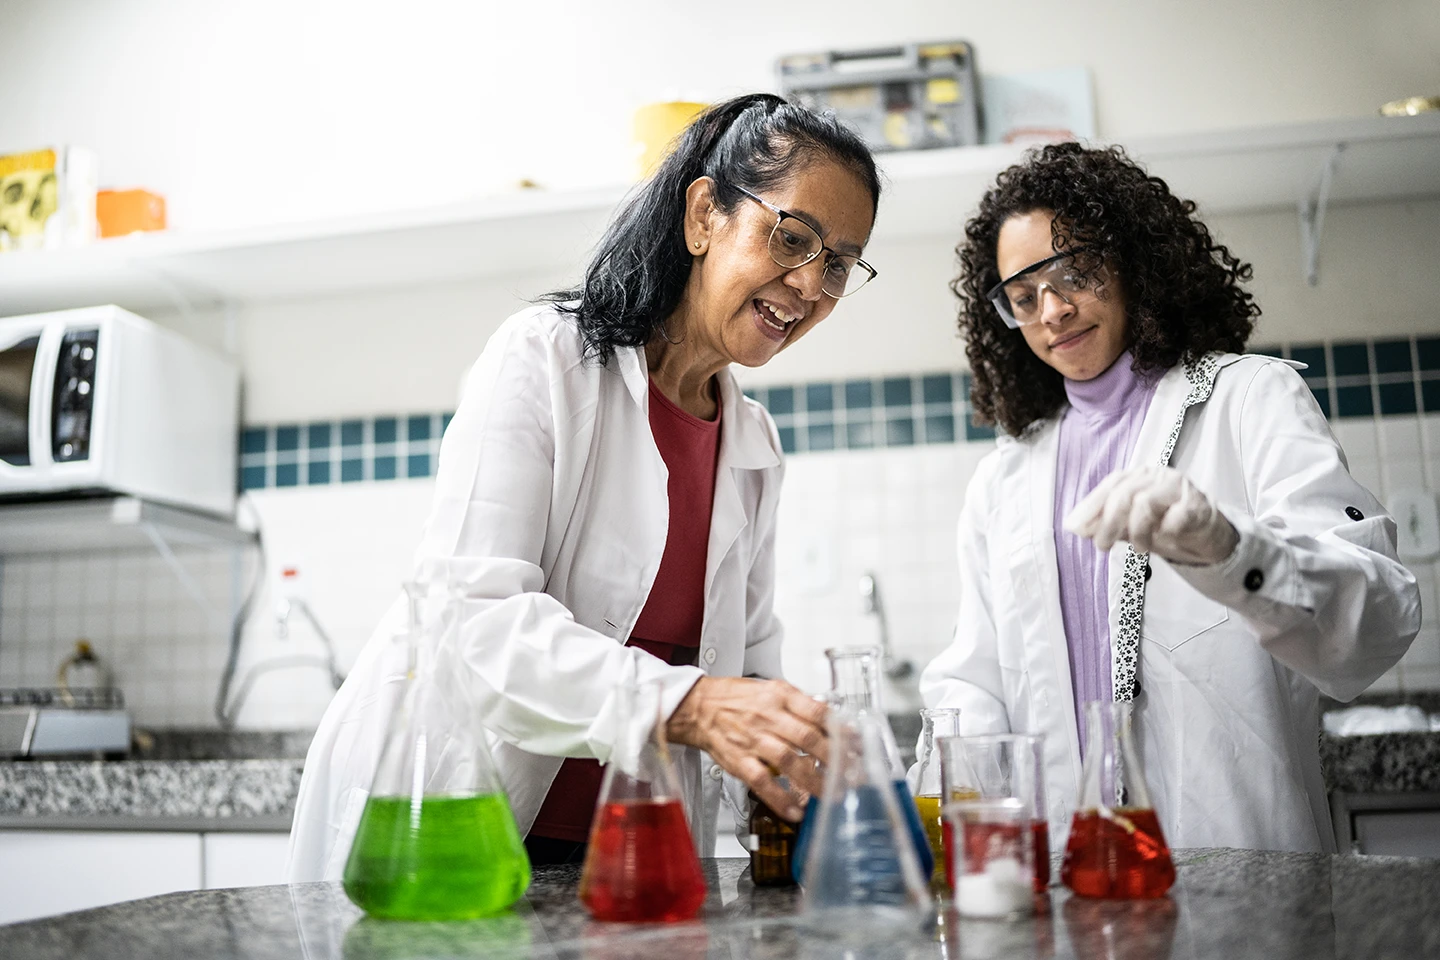 A female mentor and female student conduct research in a lab setting